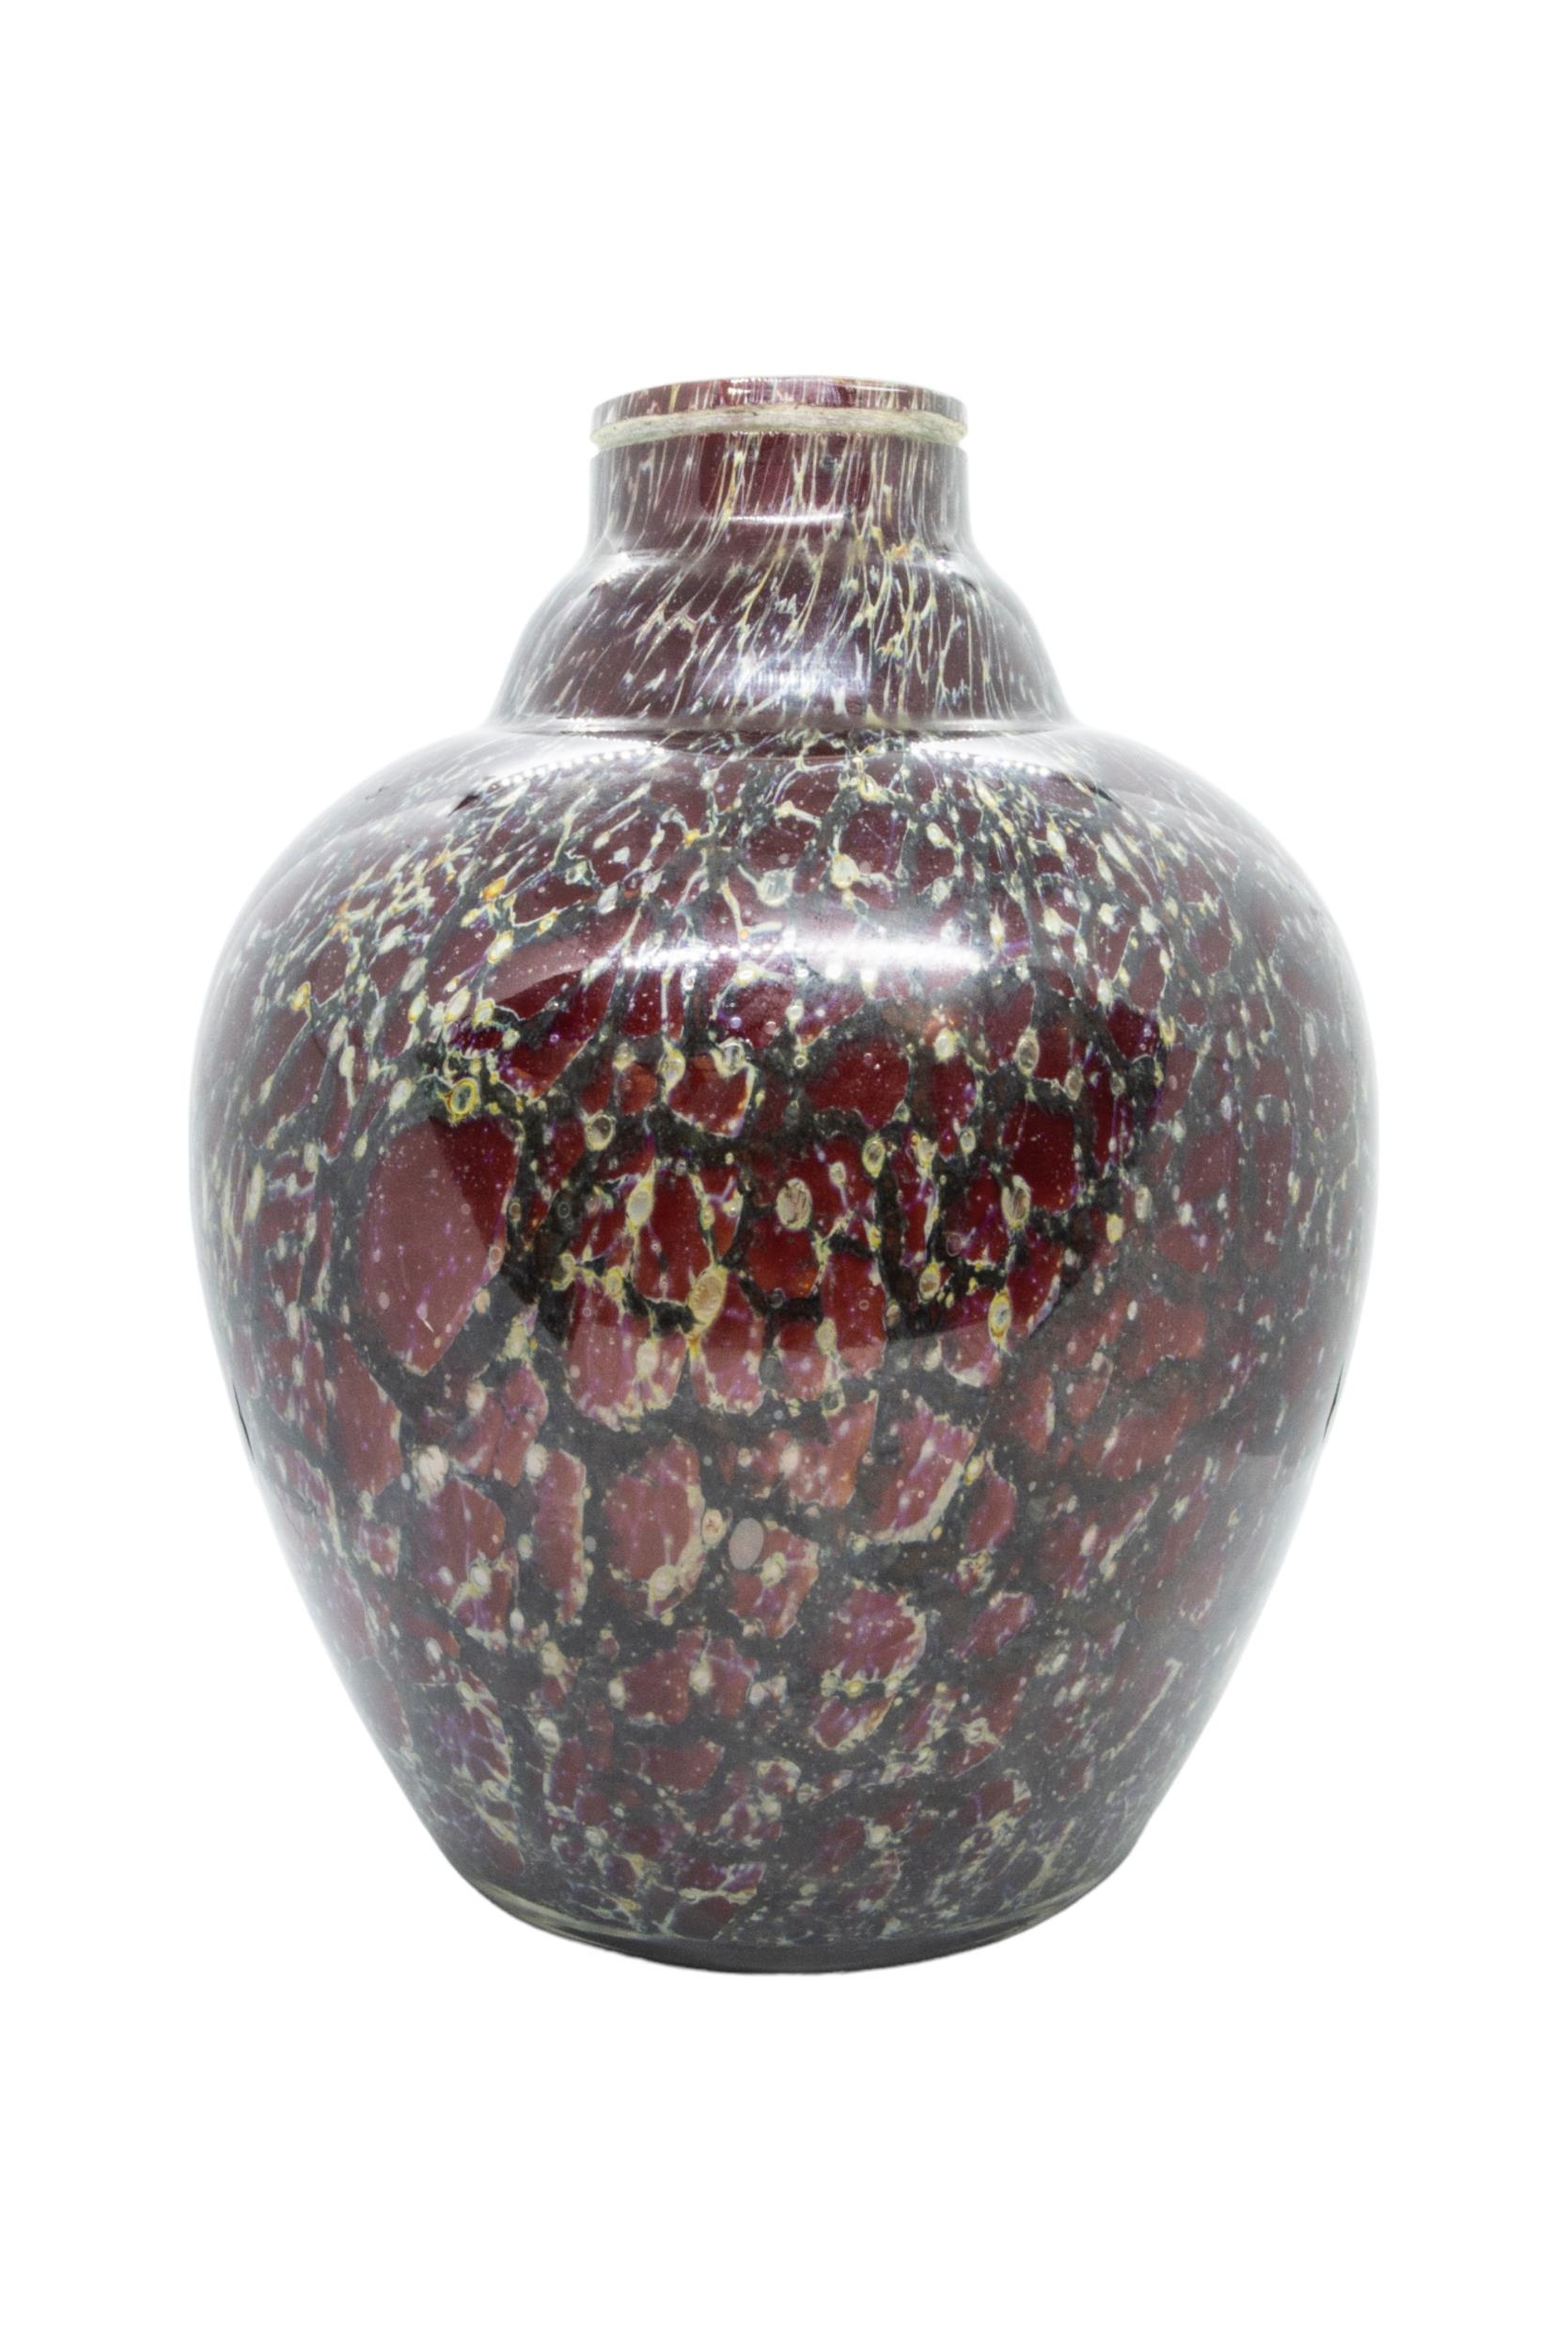 A LARGE VINTAGE BALUSTER GLASS VASE, internally decorated with a crackle effect over a rich